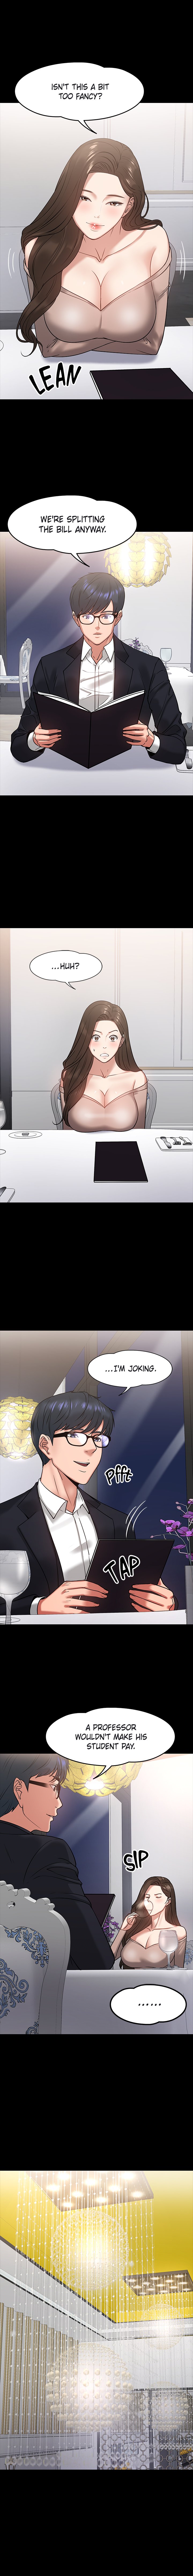 Are You Just Going To Watch? - Chapter 16 Page 6